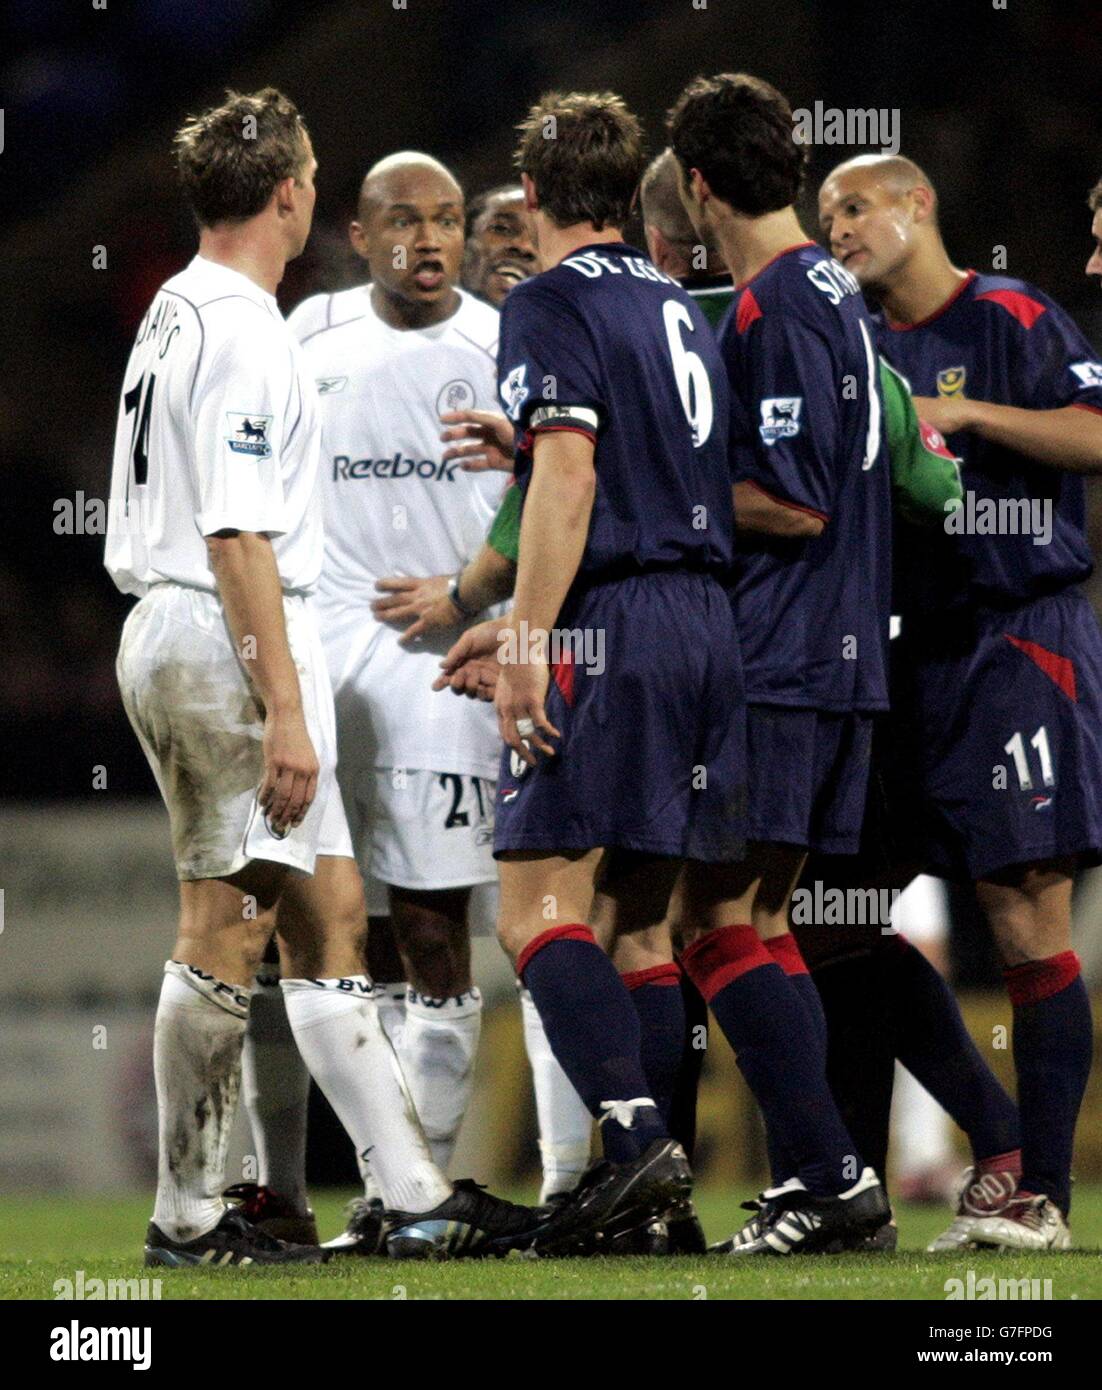 Bolton Wanderers El Hadji Diouf (2nd from left) is pulled away from Portsmouth captain Arjan De Zeeuw during the Barclays Premiership match at the Reebok Stadium, Bolton. 30/11/04: Striker Diouf will serve an immediate three-match ban after admitting a charge of improper conduct for spitting. The Senegal international was charged by the Football Association yesterday after spitting in the face of Portsmouth's Arjan de Zeeuw at the weekend. . Stock Photo